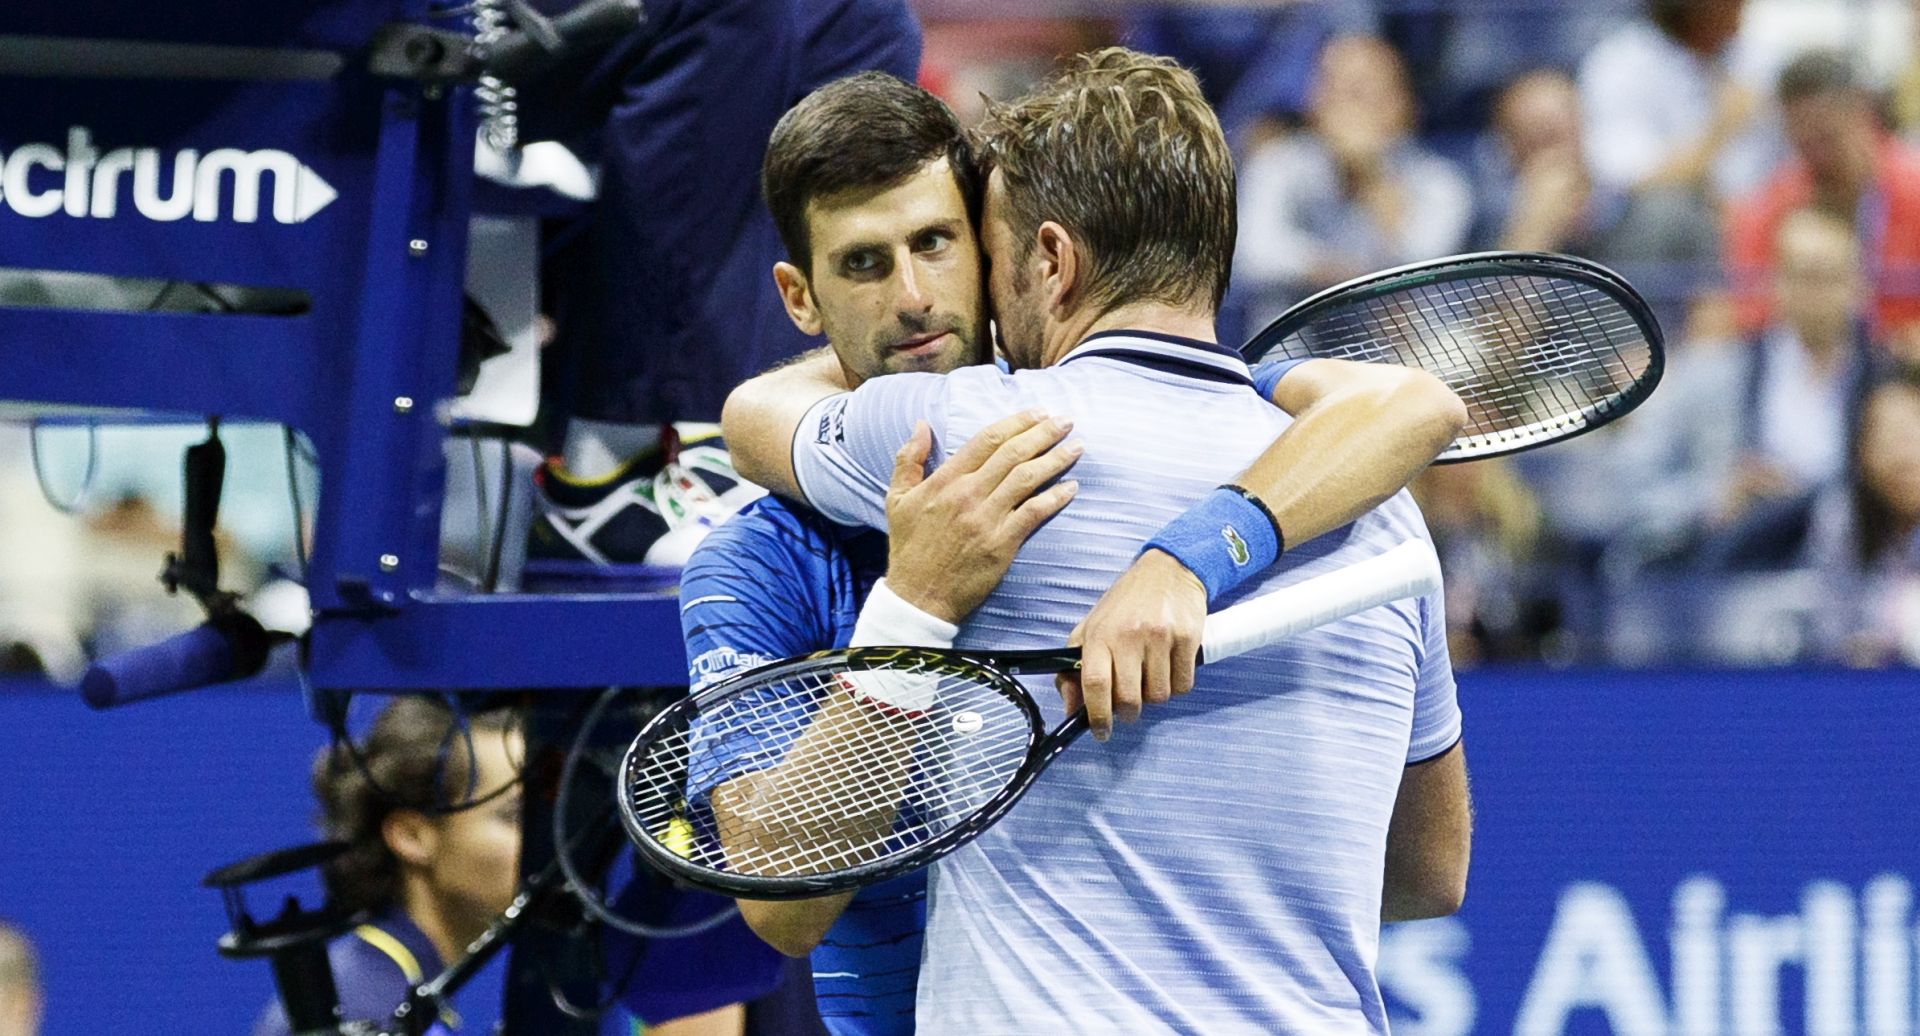 epa07811916 Novak Djokovic (L) of Serbia embraces Stan Wawrinka (R) of Switzerland after Djokovic retired in the third set during a match on the seventh day of the US Open Tennis Championships the USTA National Tennis Center in Flushing Meadows, New York, USA, 01 September 2019. The US Open runs from 26 August through to 08 September 2019.  EPA/JUSTIN LANE